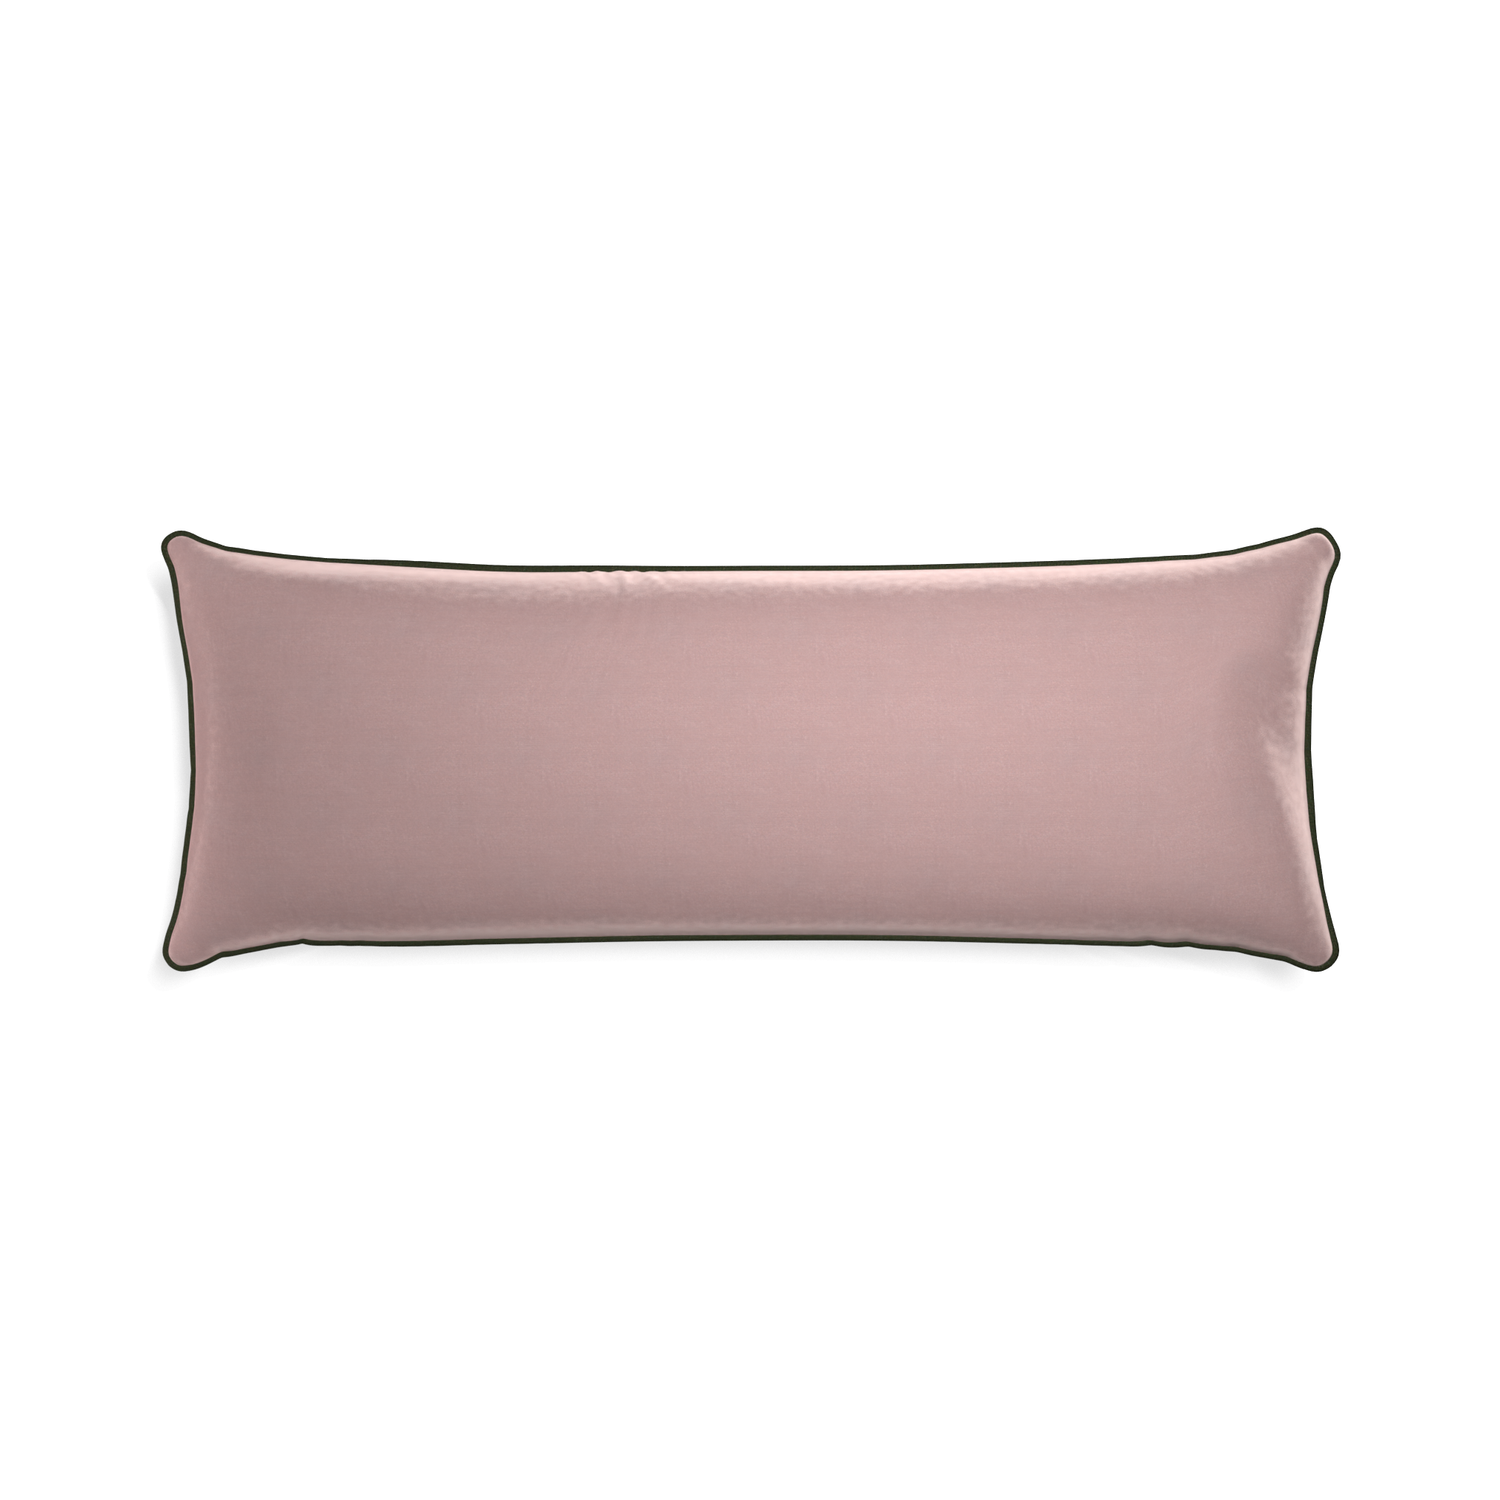 rectangle mauve velvet pillow with fern green piping